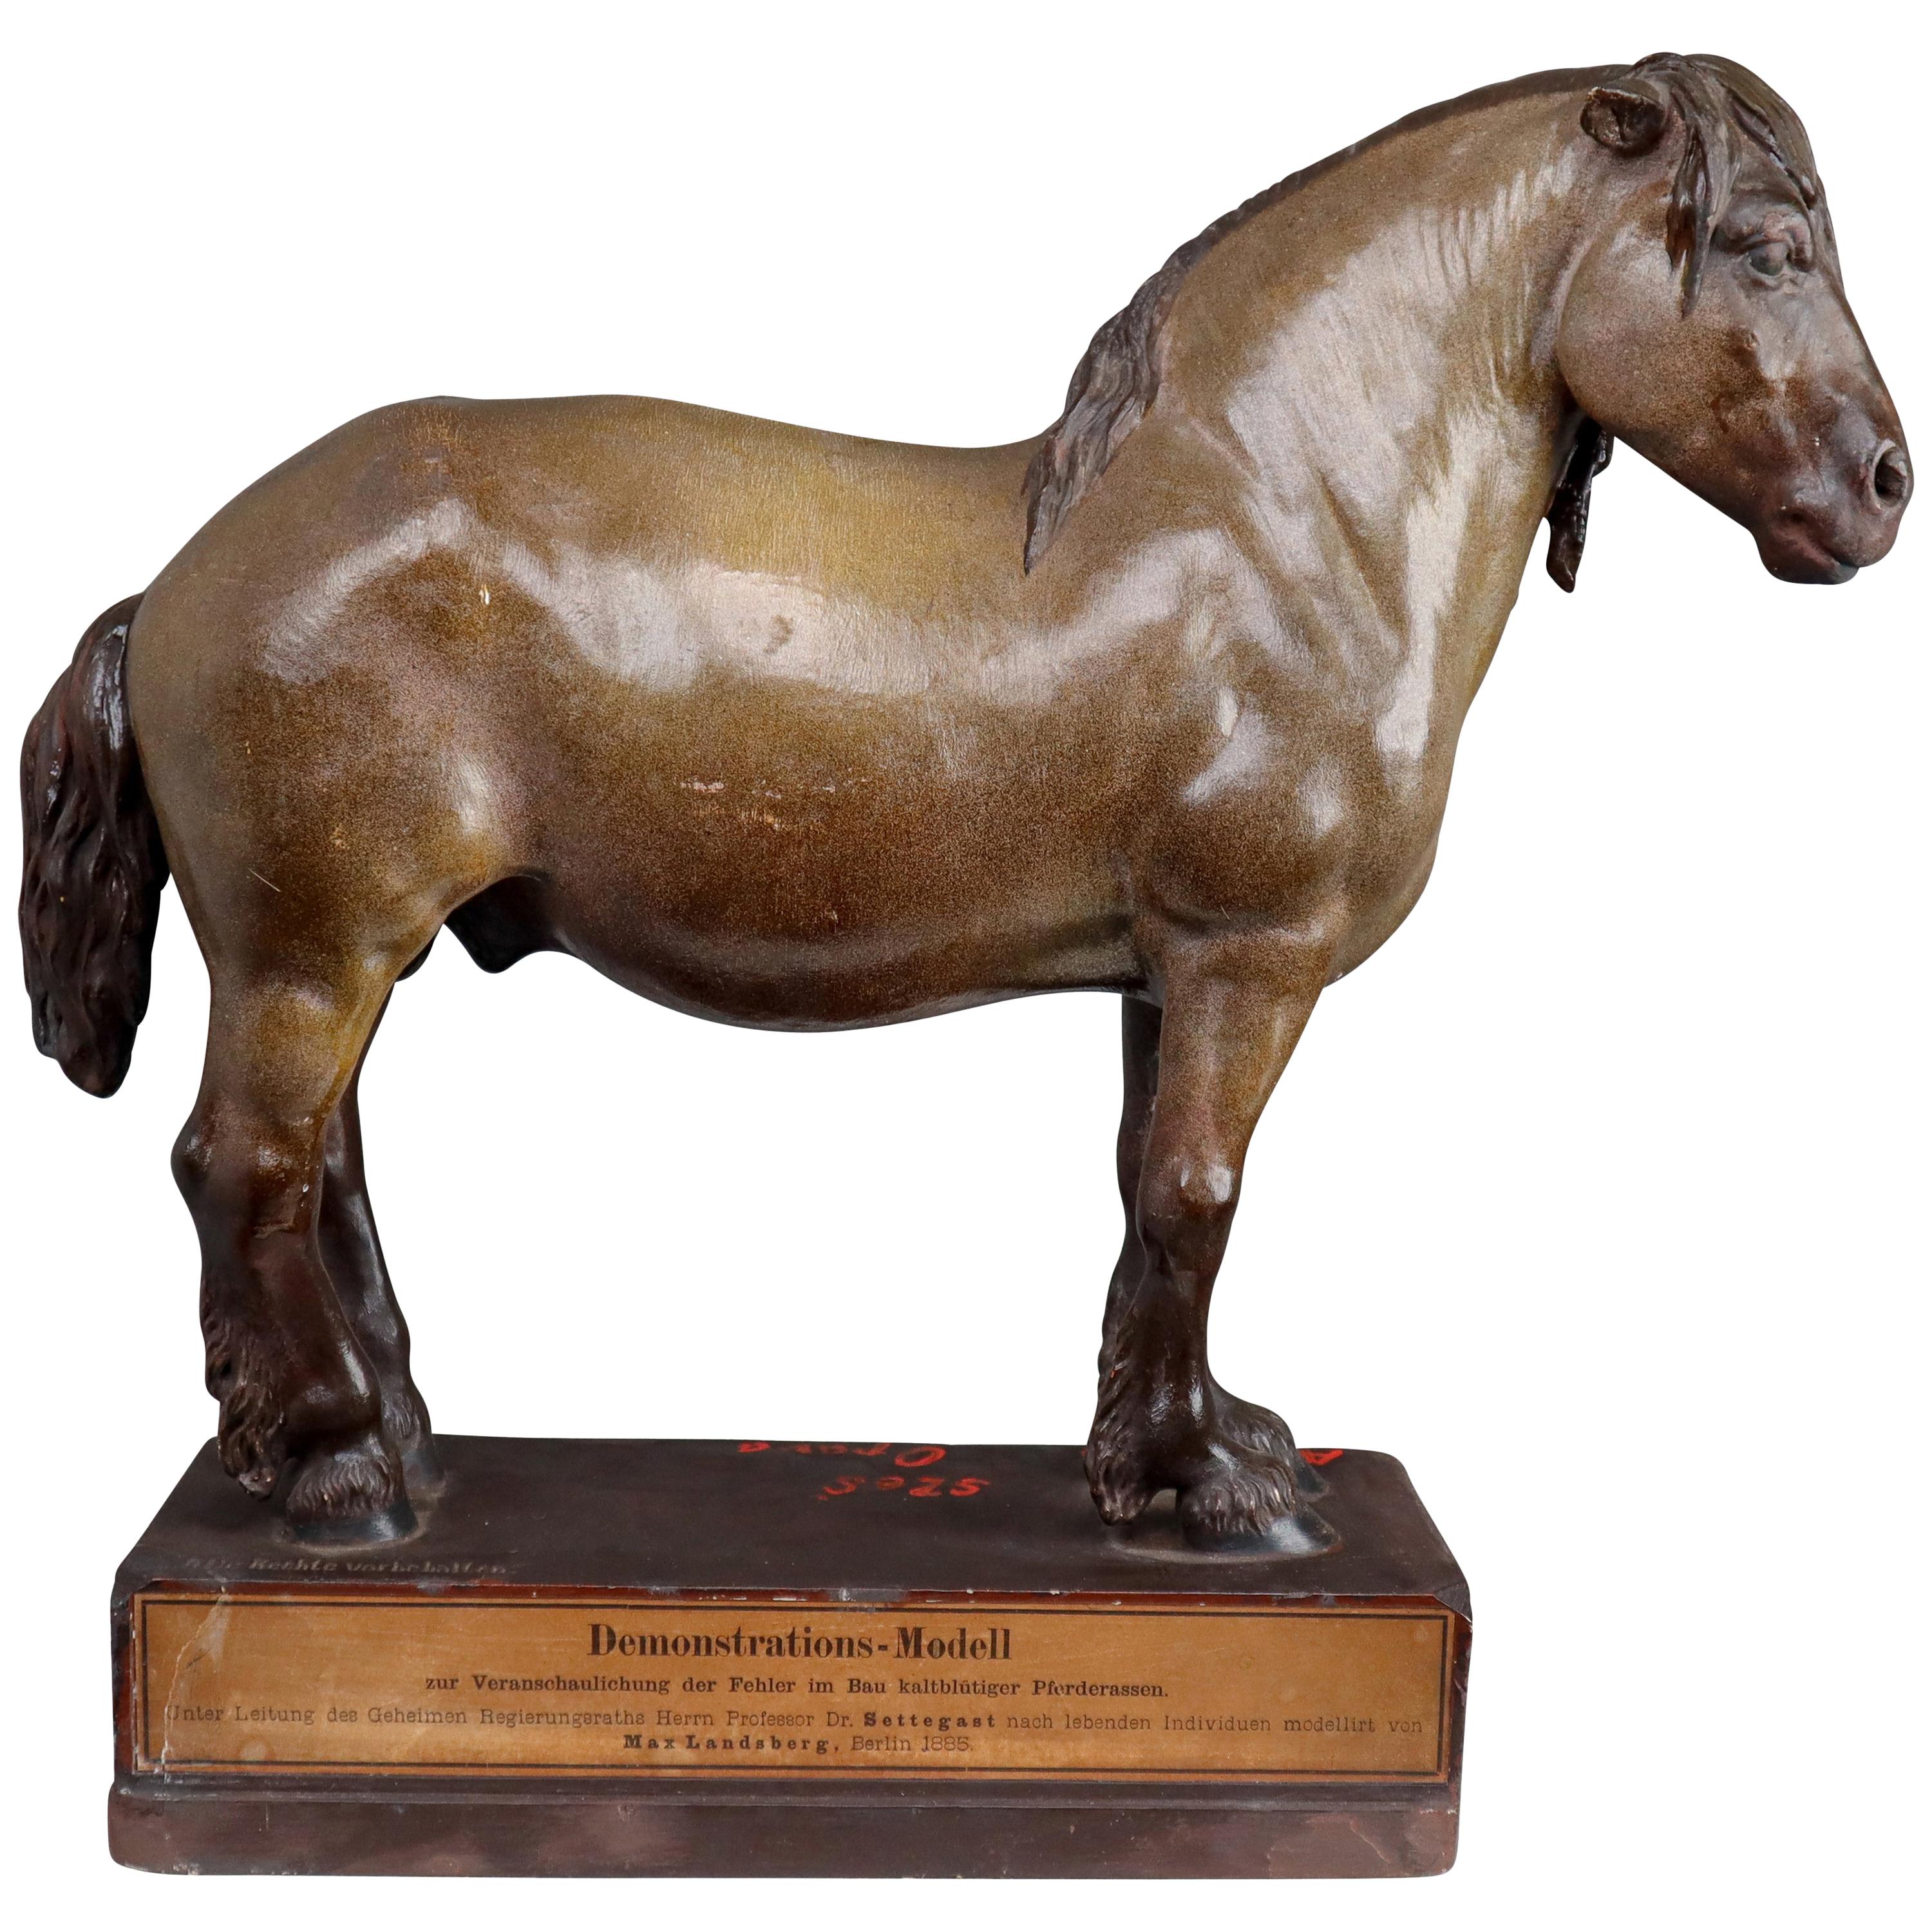 Cold Blood Horse Model in Painted Plaster by Max Landsberg, Berlin 1885